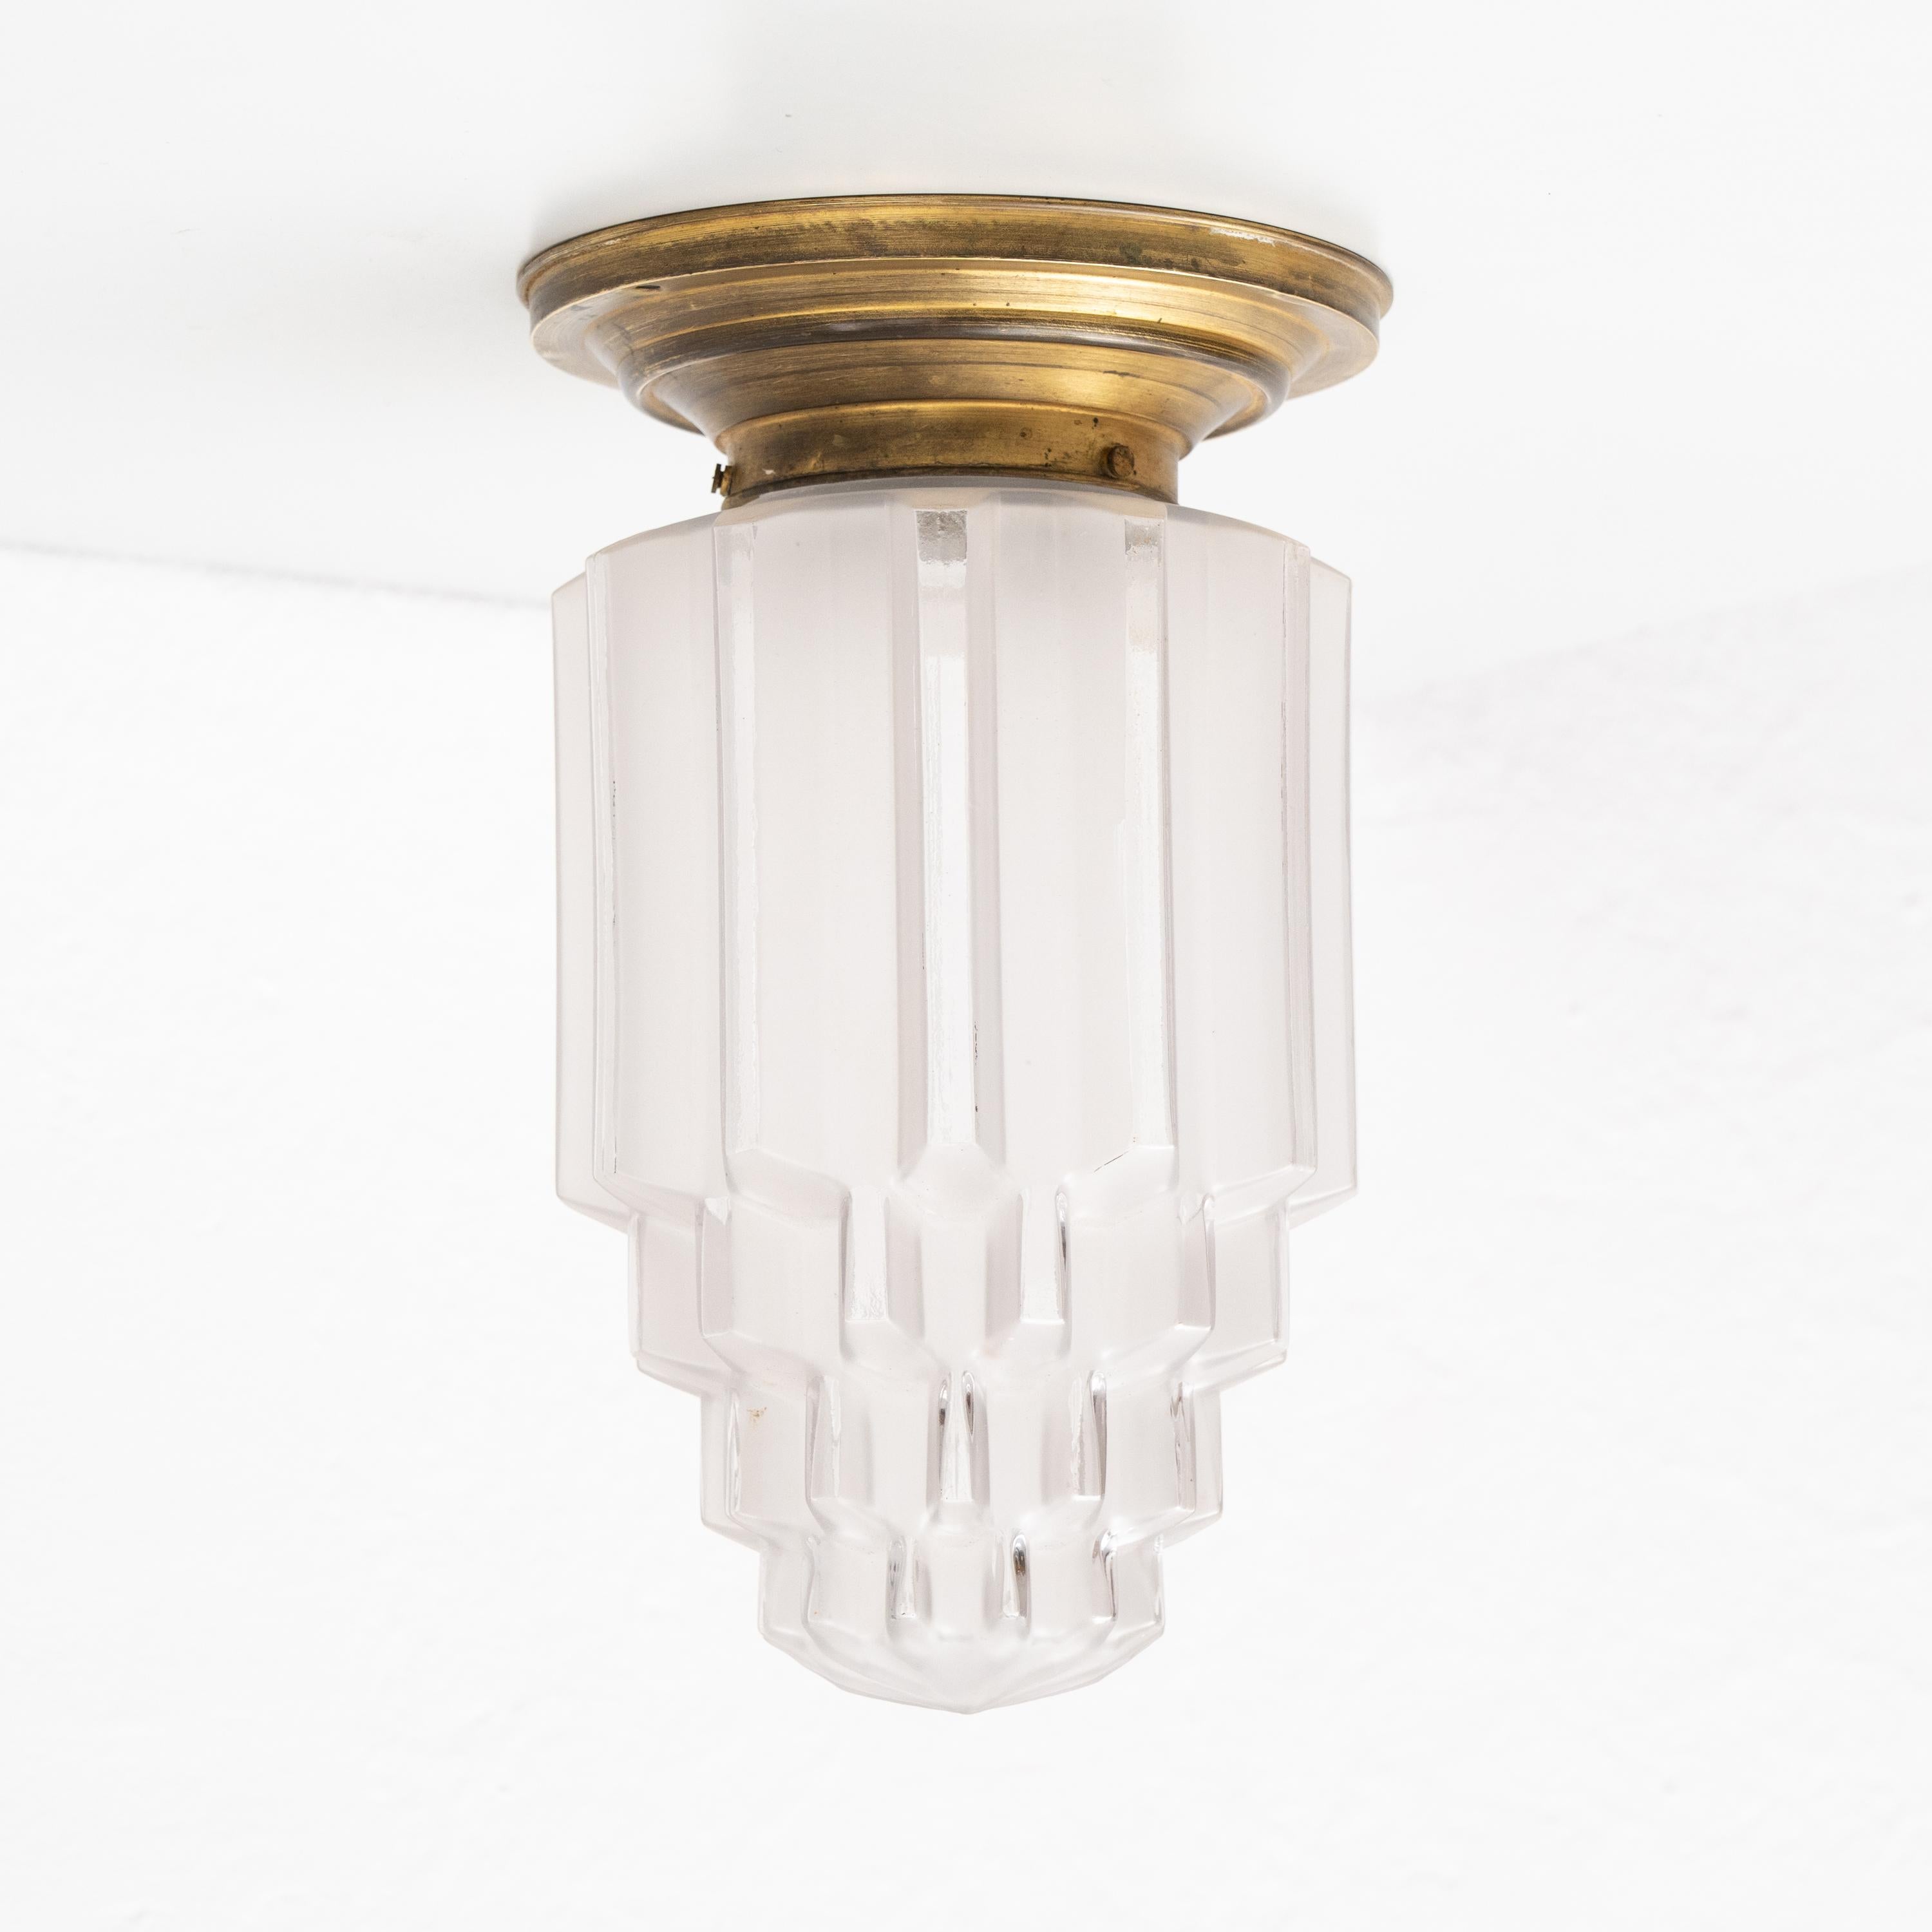 Vintage Art Deco Brass and Glass Ceiling Lamp, circa 1940 For Sale 6